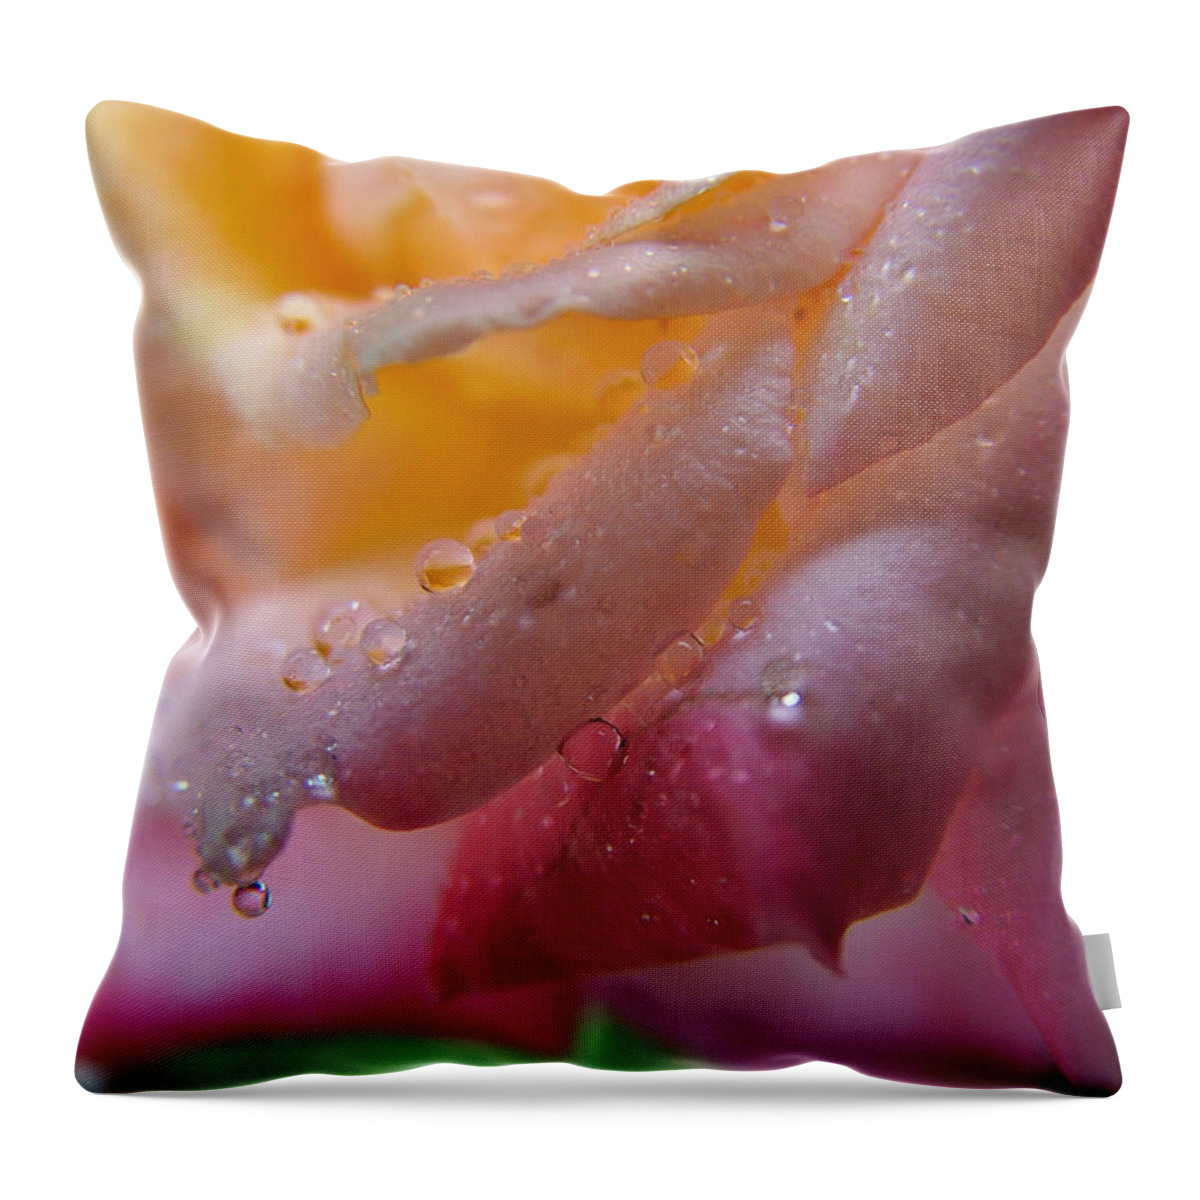 Rose Throw Pillow featuring the photograph Teardrop of a Rose by Kathy Churchman